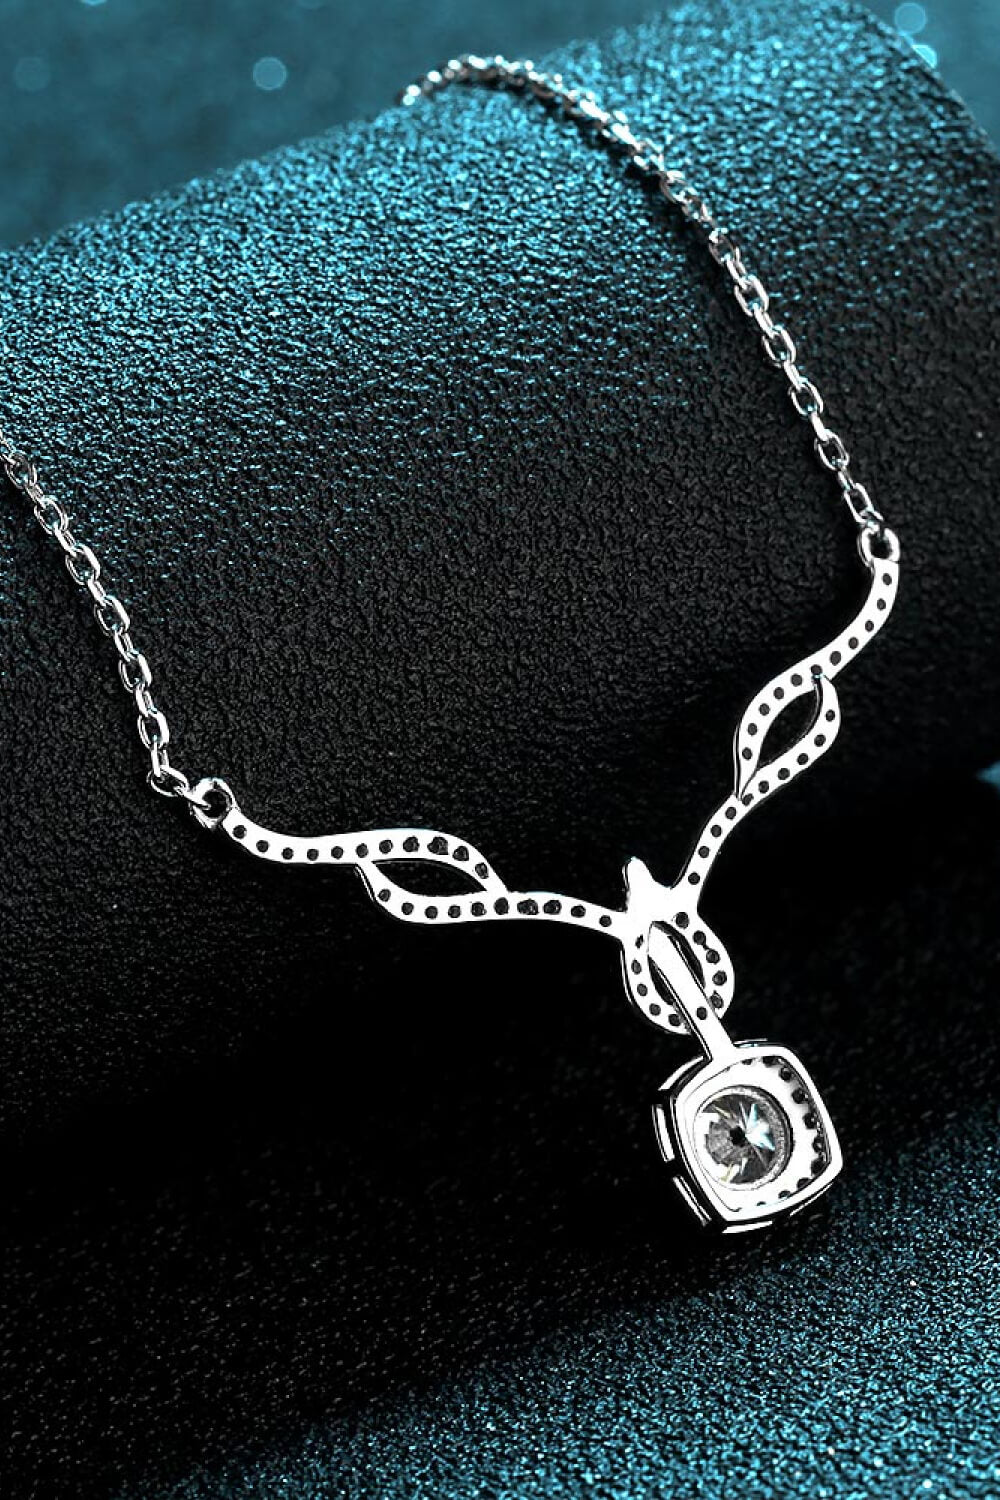 Right On Trend Moissanite Pendant Necklace - Necklaces - FITGGINS